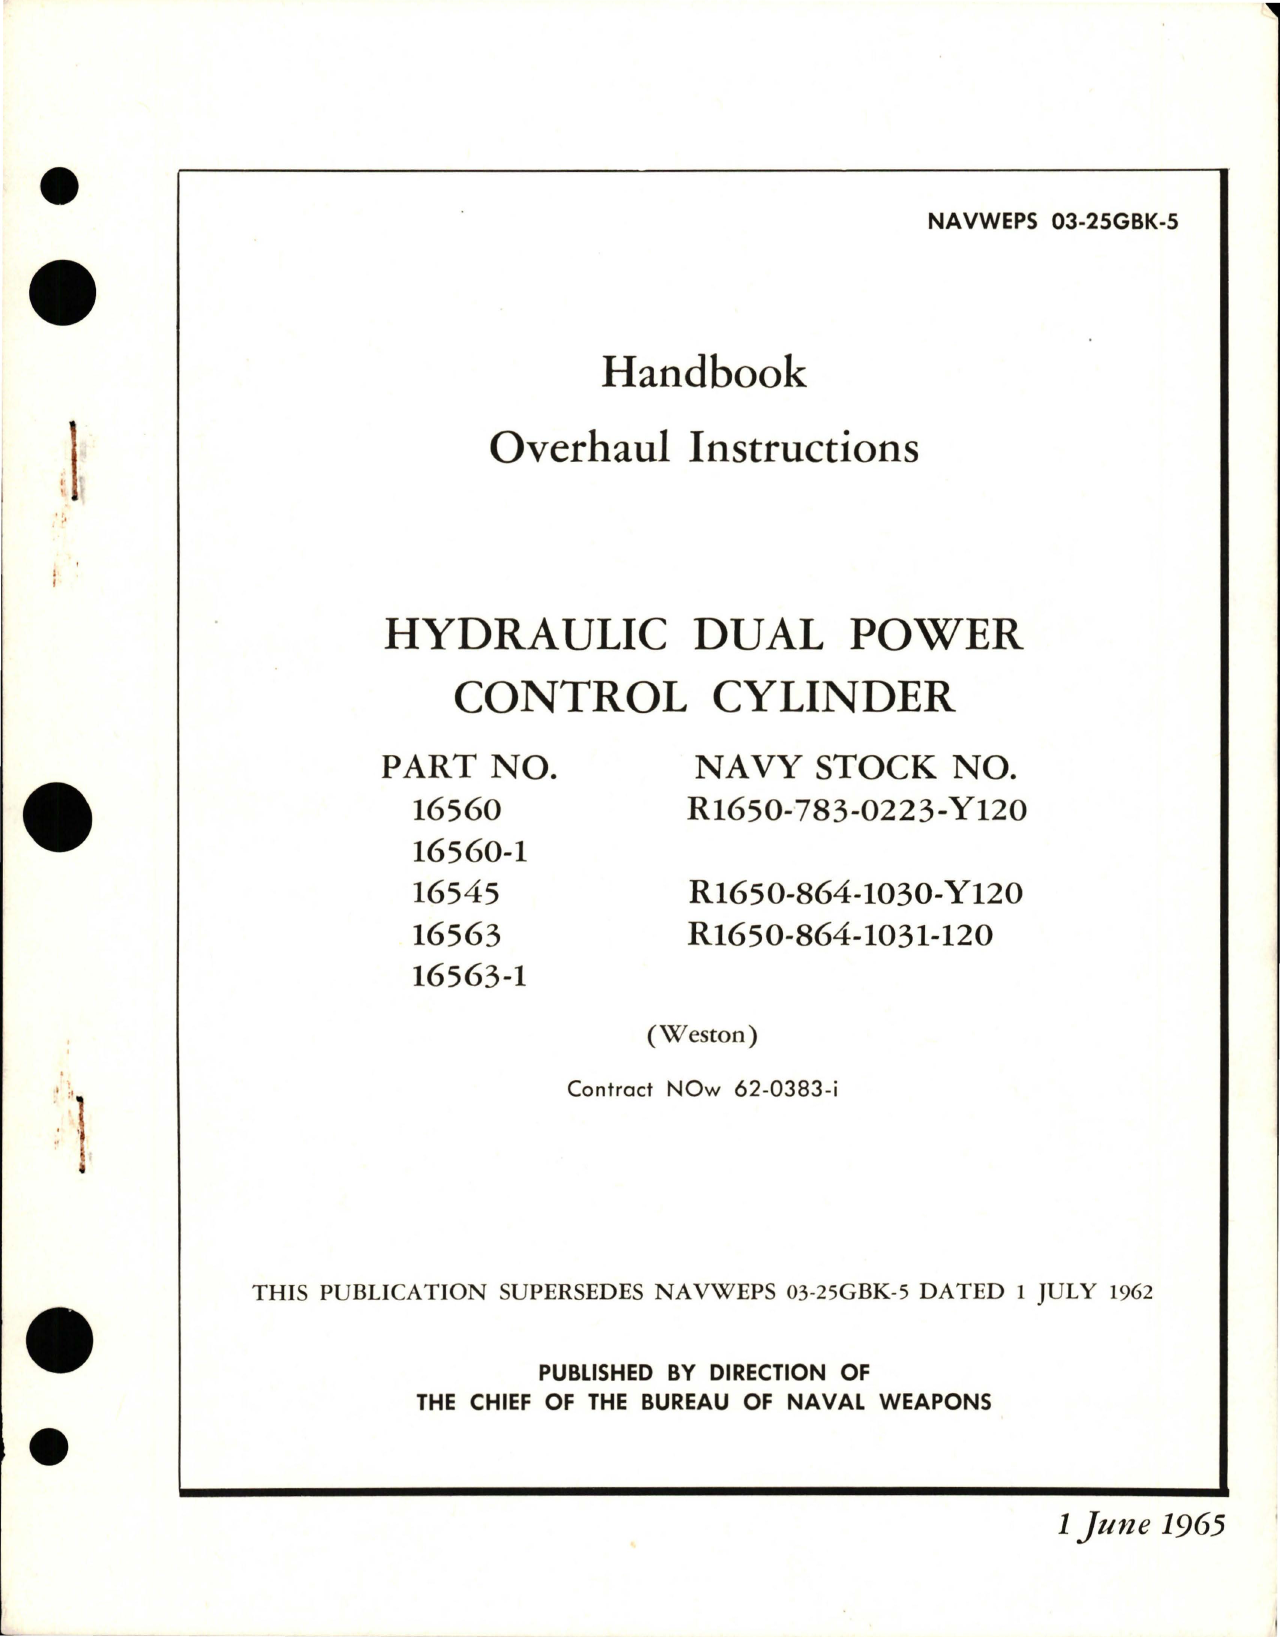 Sample page 1 from AirCorps Library document: Overhaul Instructions for Hydraulic Dual Power Control Cylinder - Parts 16560, 16560-1, 16545, 16563, and 16563-1